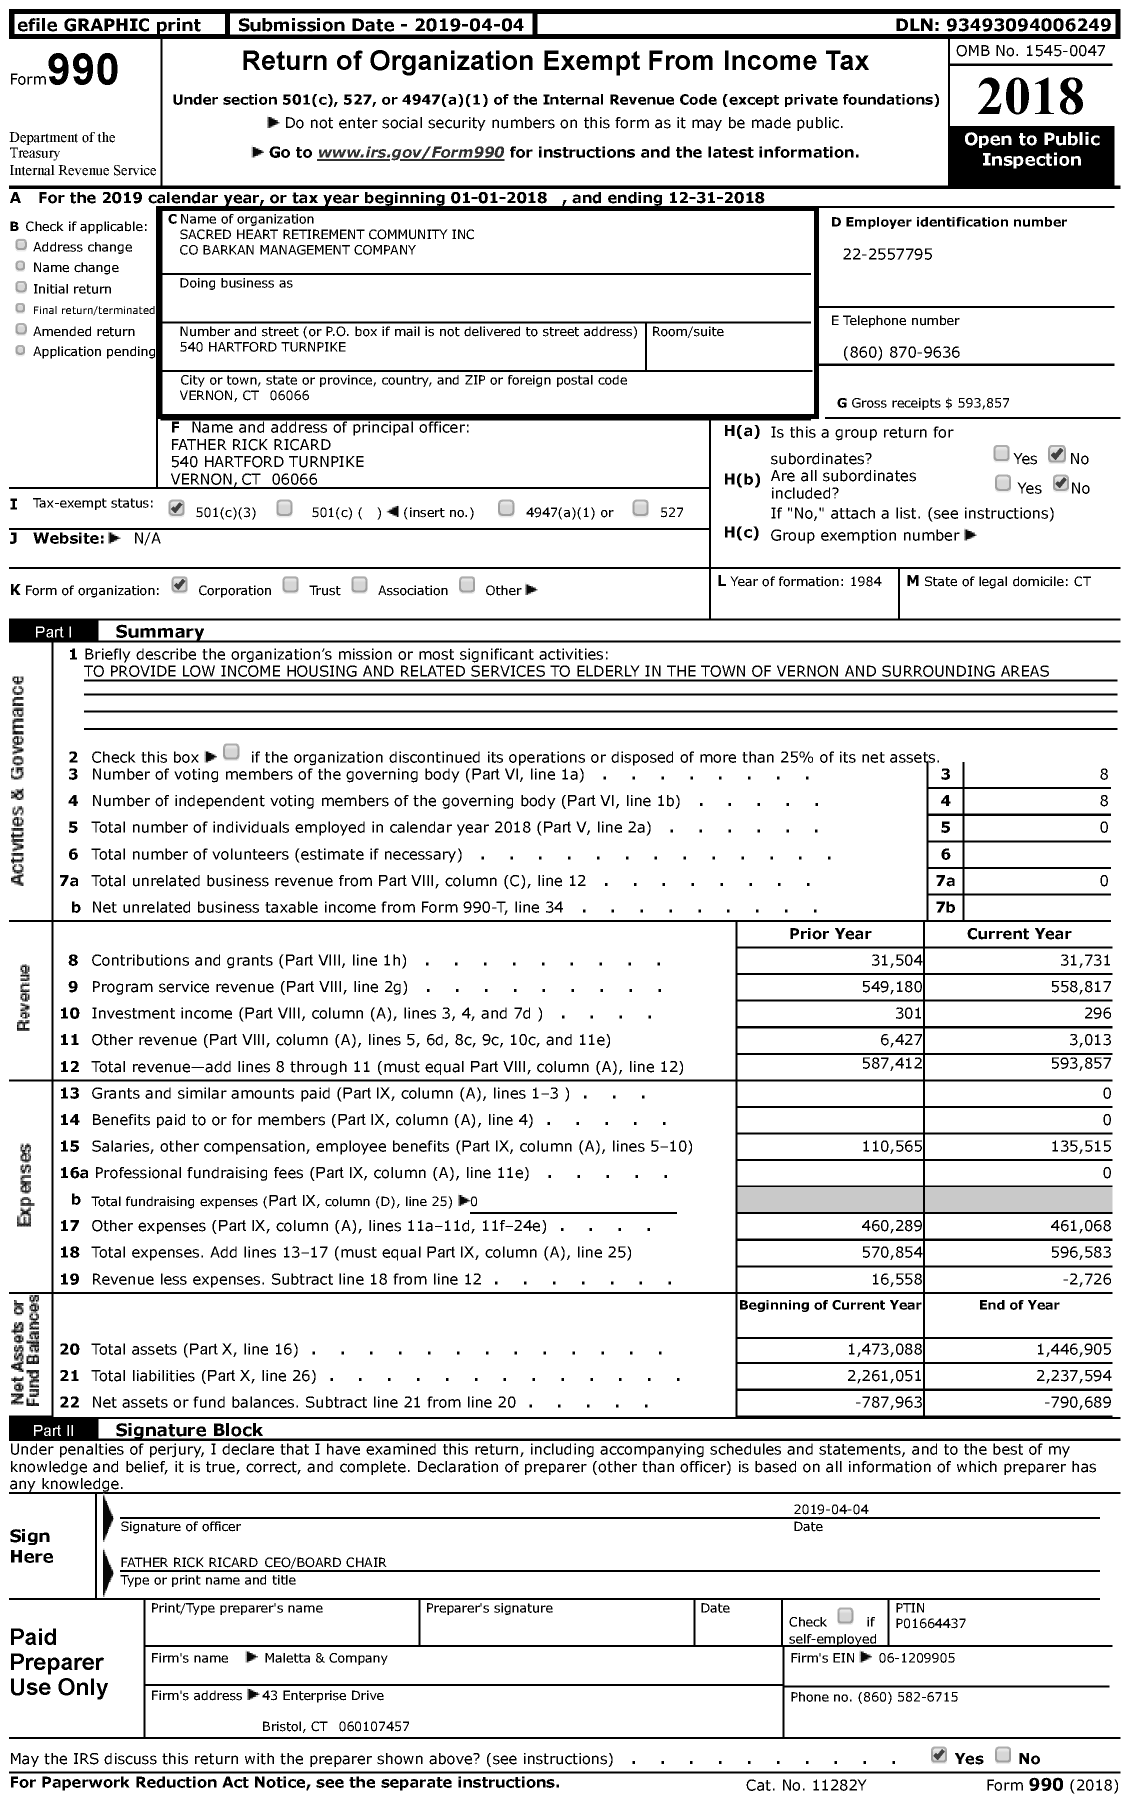 Image of first page of 2018 Form 990 for Sacred Heart Retirement Community